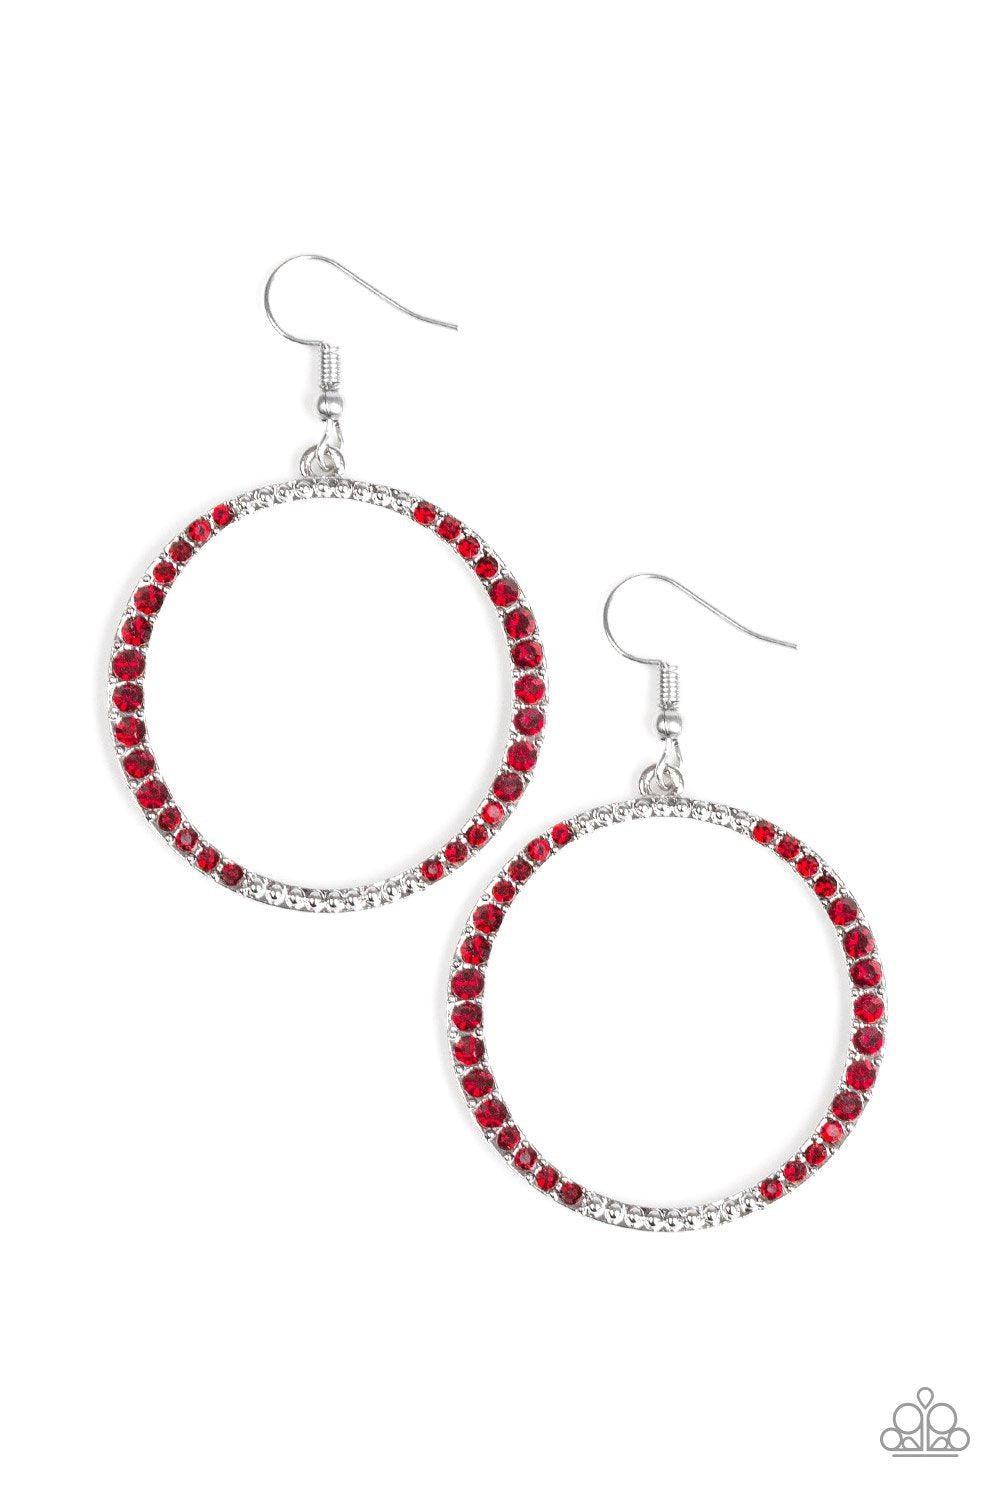 Risky Ritz Red and Silver Earrings - Paparazzi Accessories-CarasShop.com - $5 Jewelry by Cara Jewels